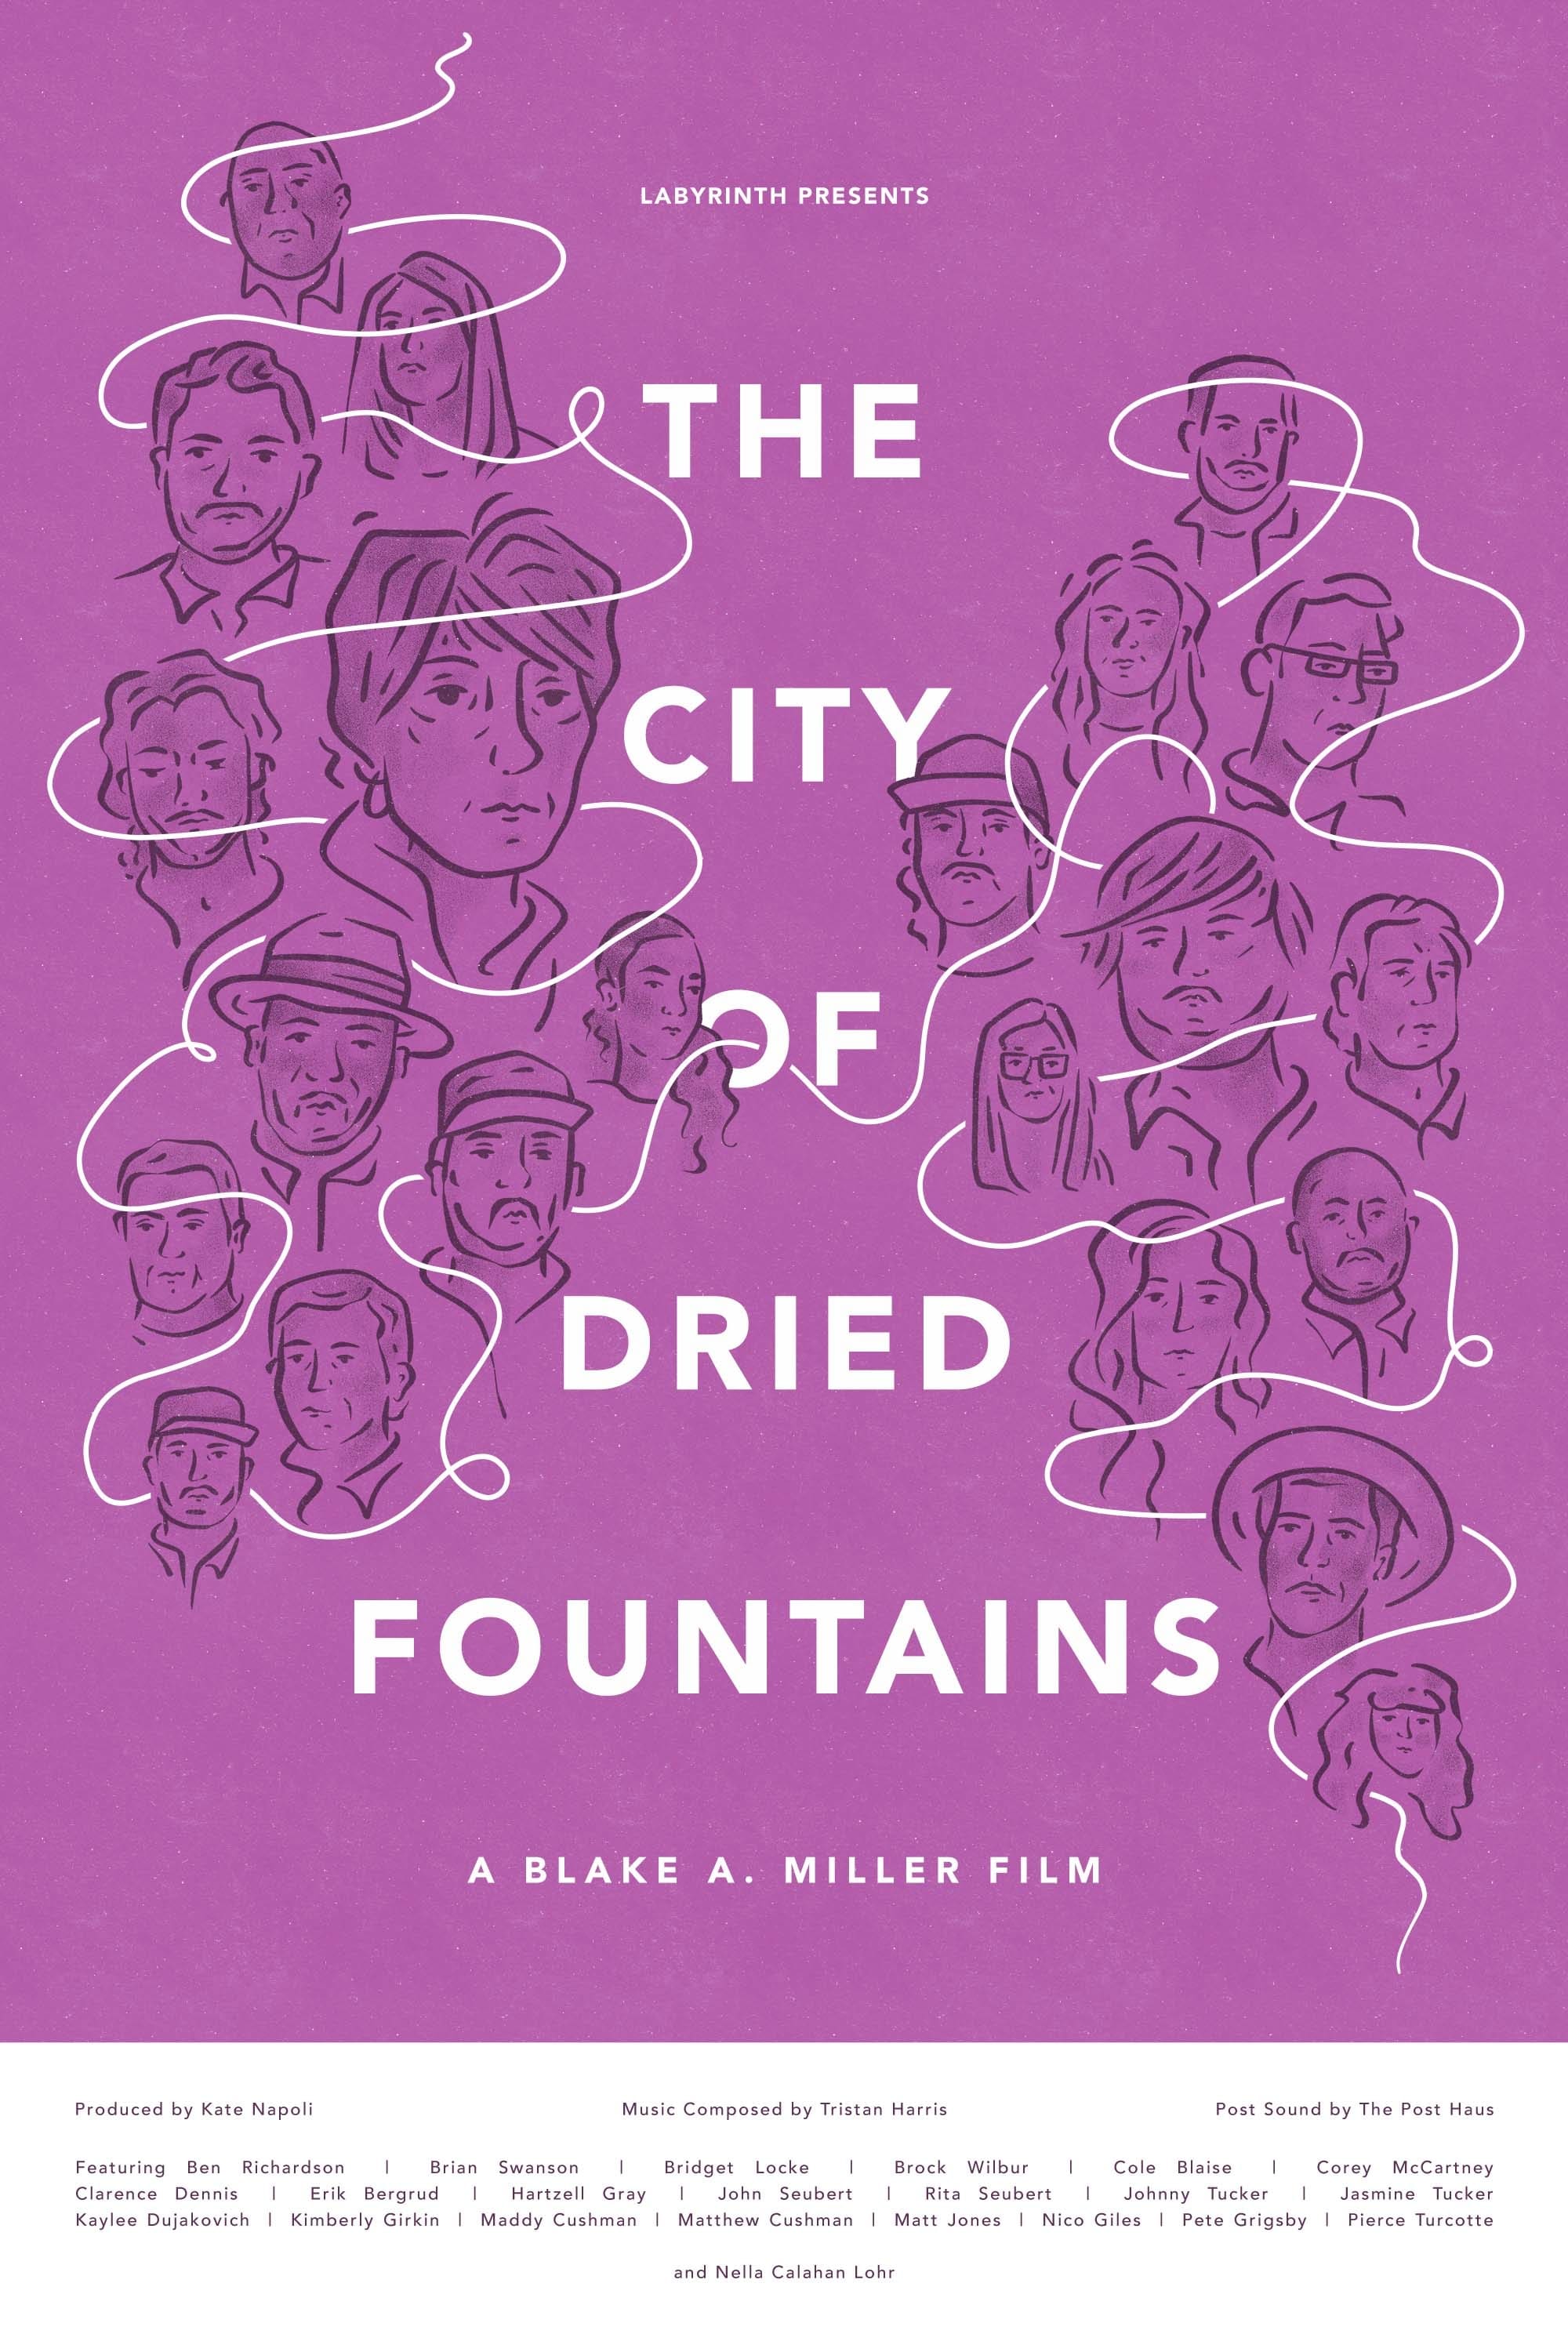 The City of Dried Fountains